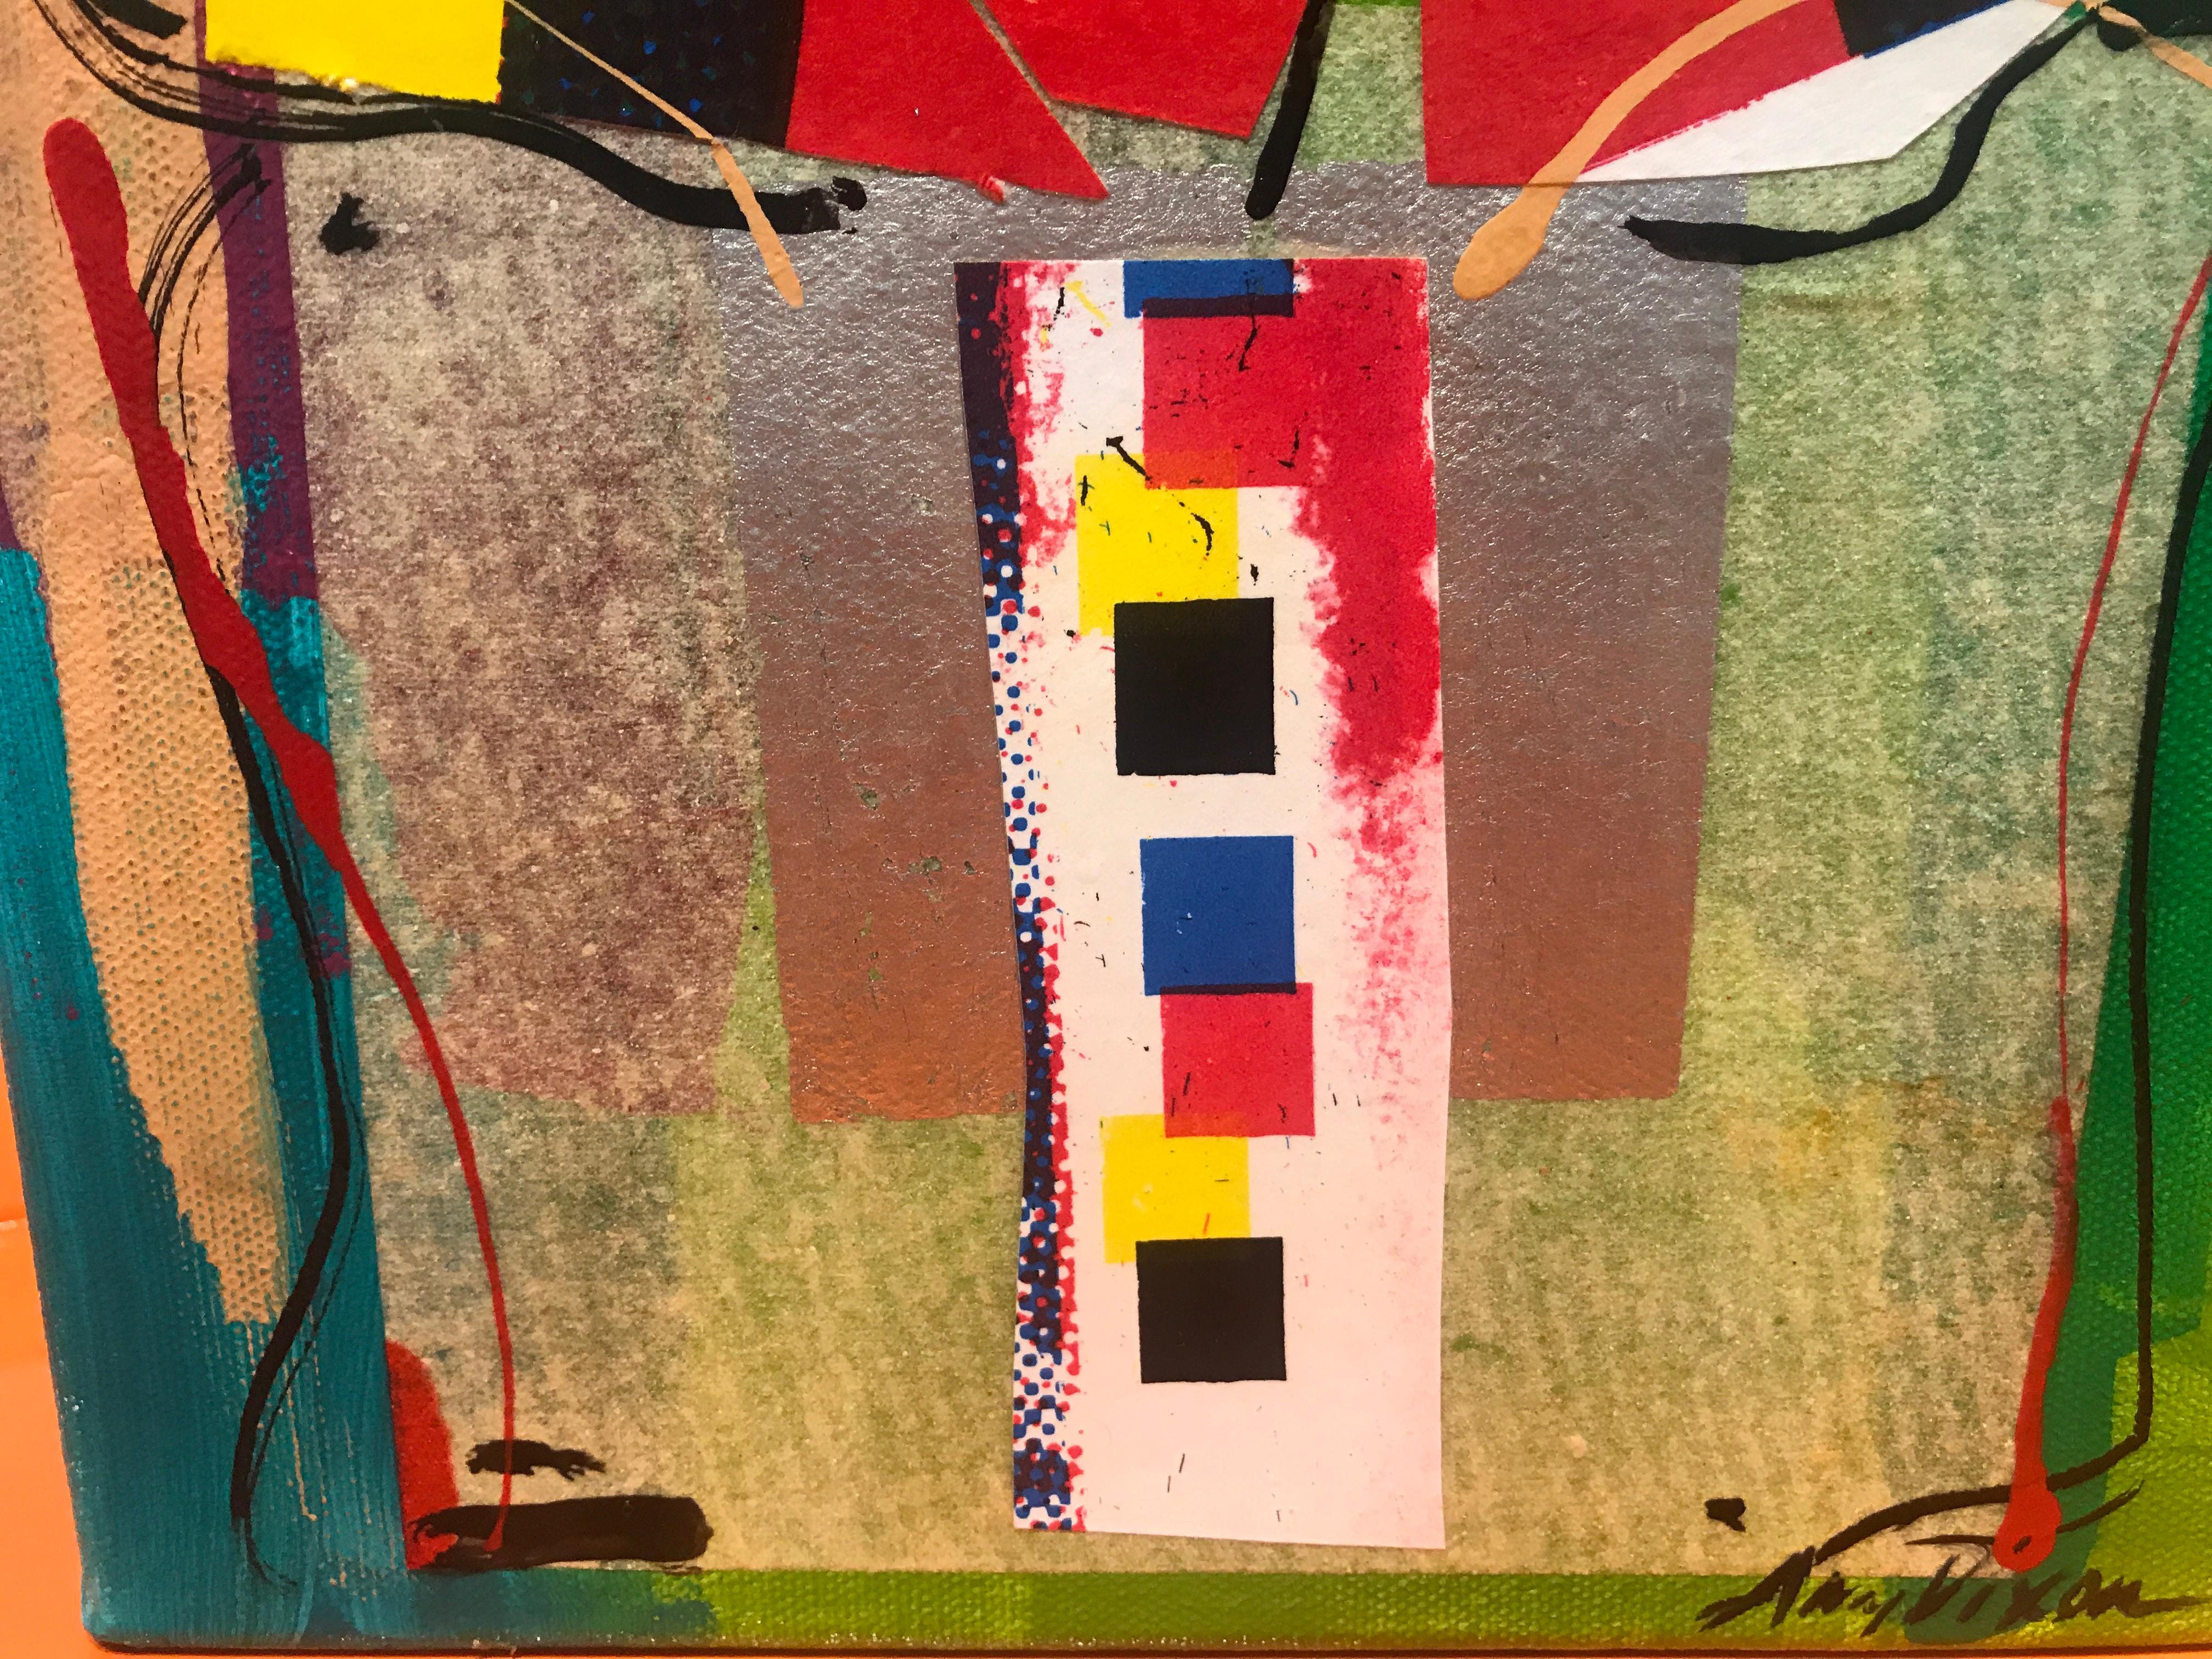 Sussie III by Amy Dixon, small square abstract present painting on canvas 5